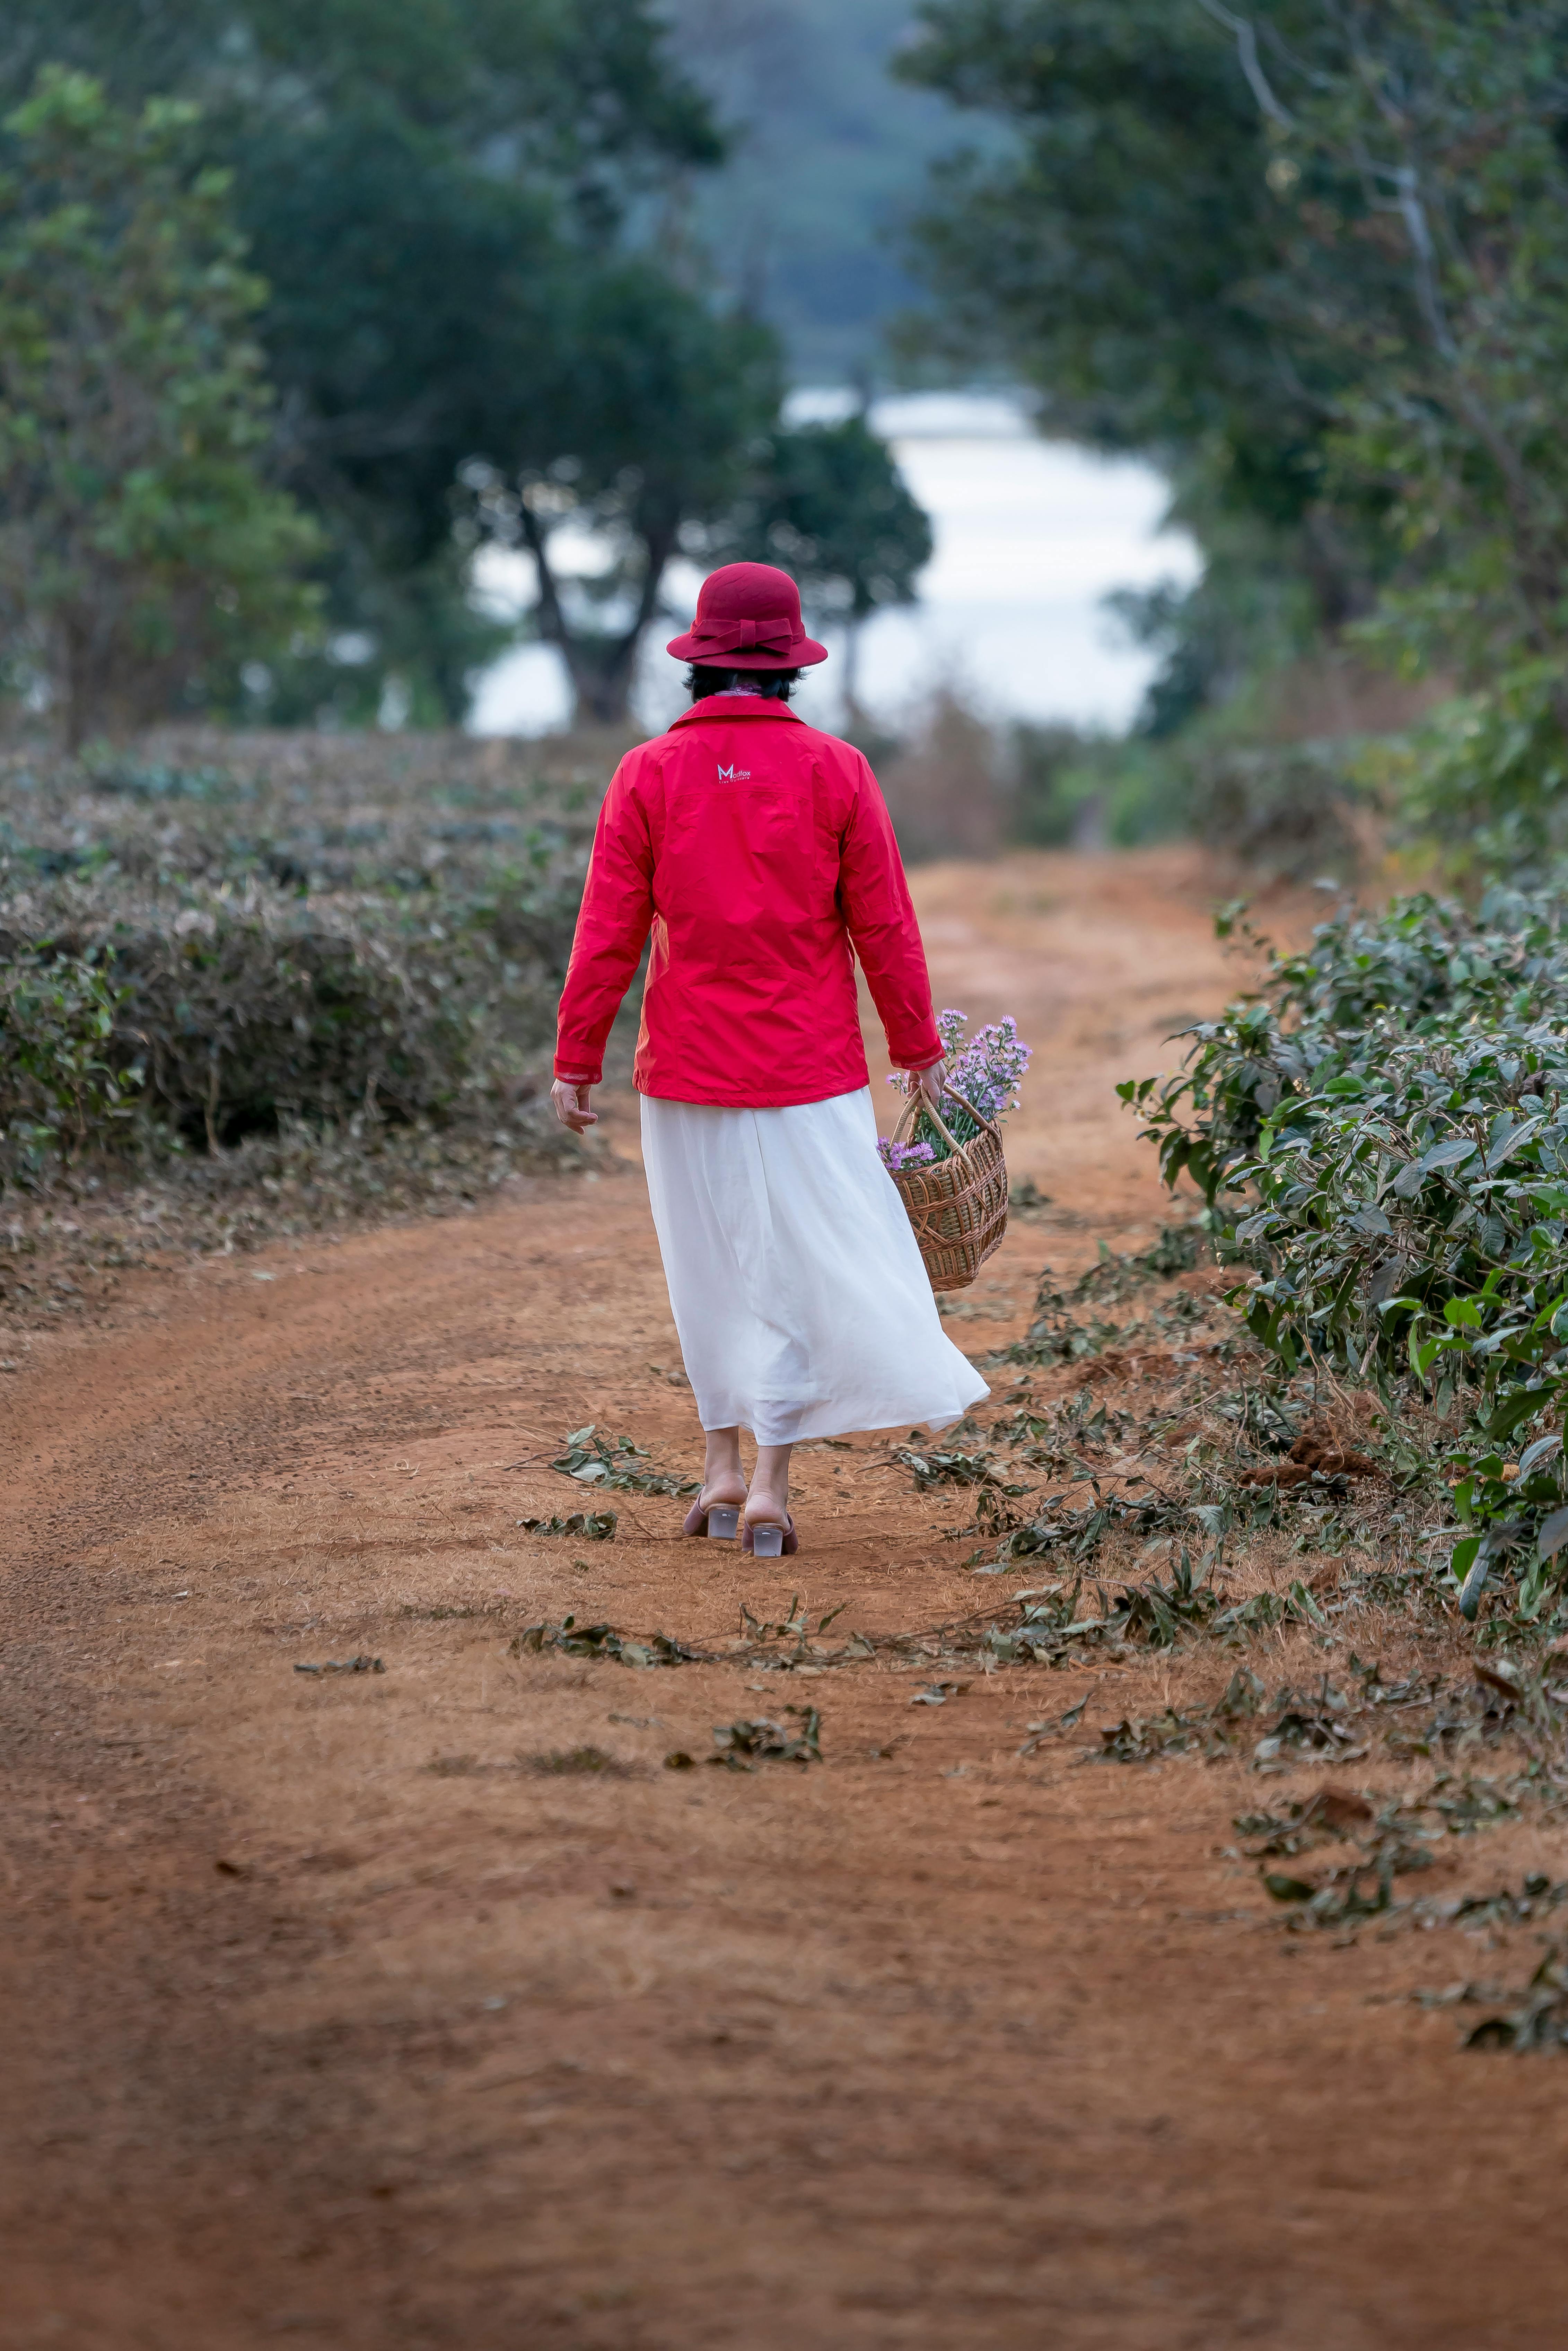 a woman walking in a road carrying a basket